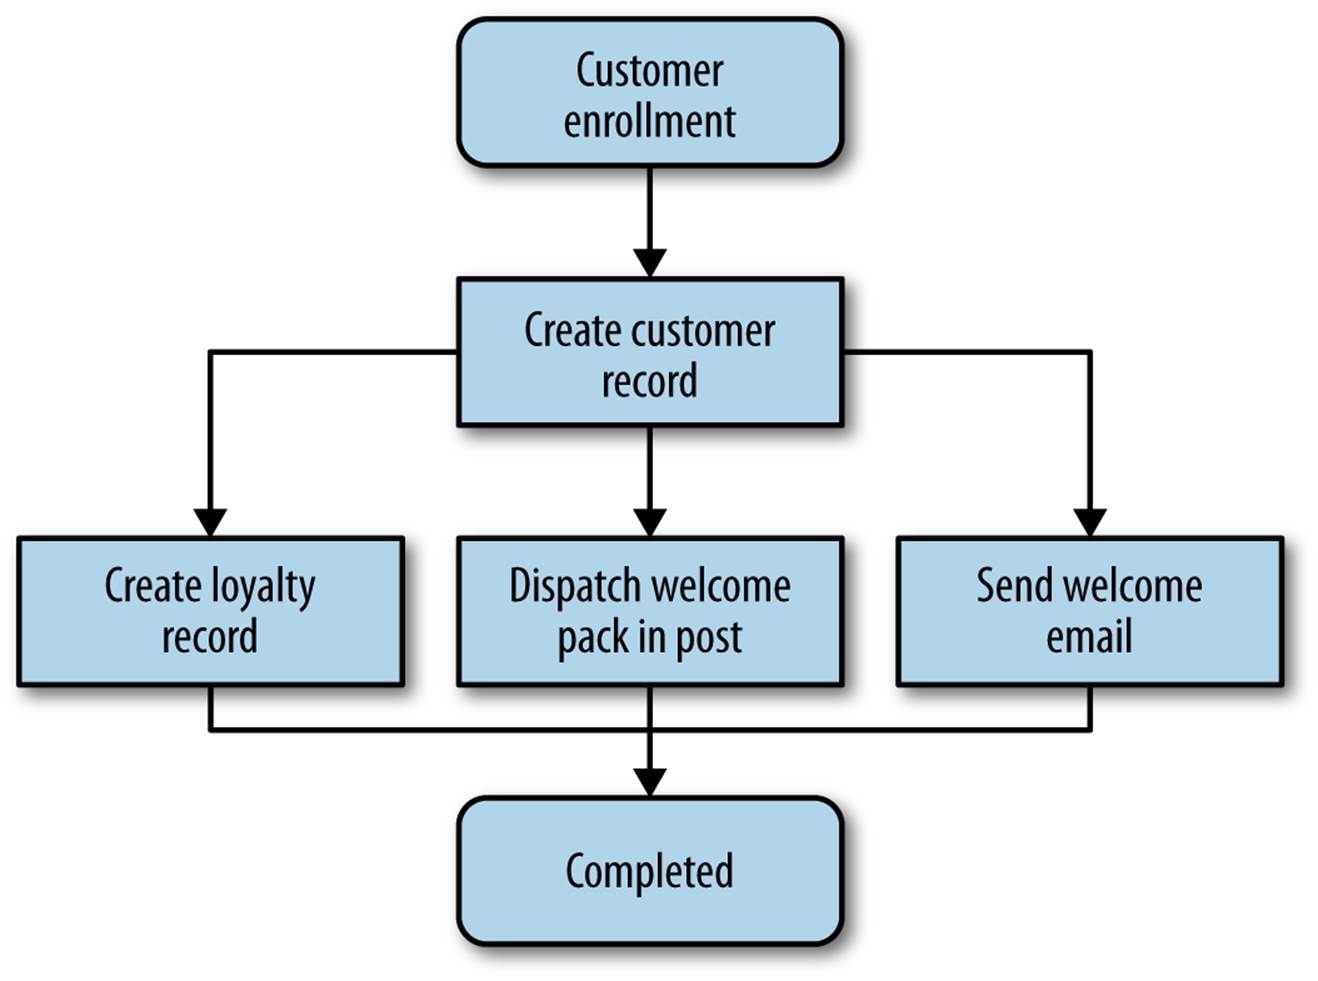 The process we want to follow for creating a new Customer